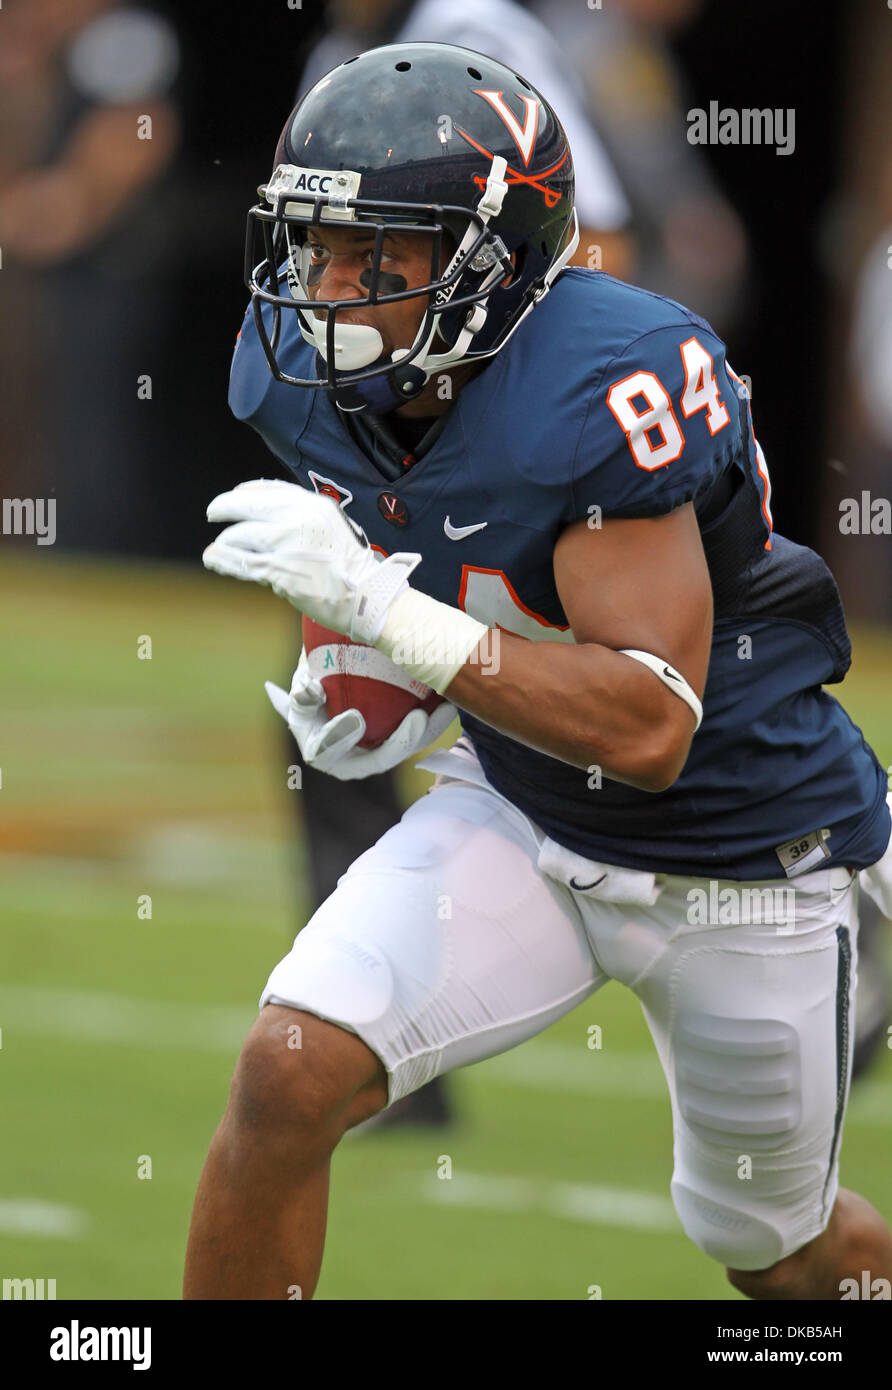 Sep. 24, 2011 - Charlottesville, Virginia, U.S. - Virginia Cavaliers wide receiver E.J. SCOTT (84) runs with the ball during the game at Scott Stadium. Mississippi Eagles beat Virginia Cavaliers 30-24. (Credit Image: © Andrew Shurtleff/ZUMAPRESS.com) Stock Photo